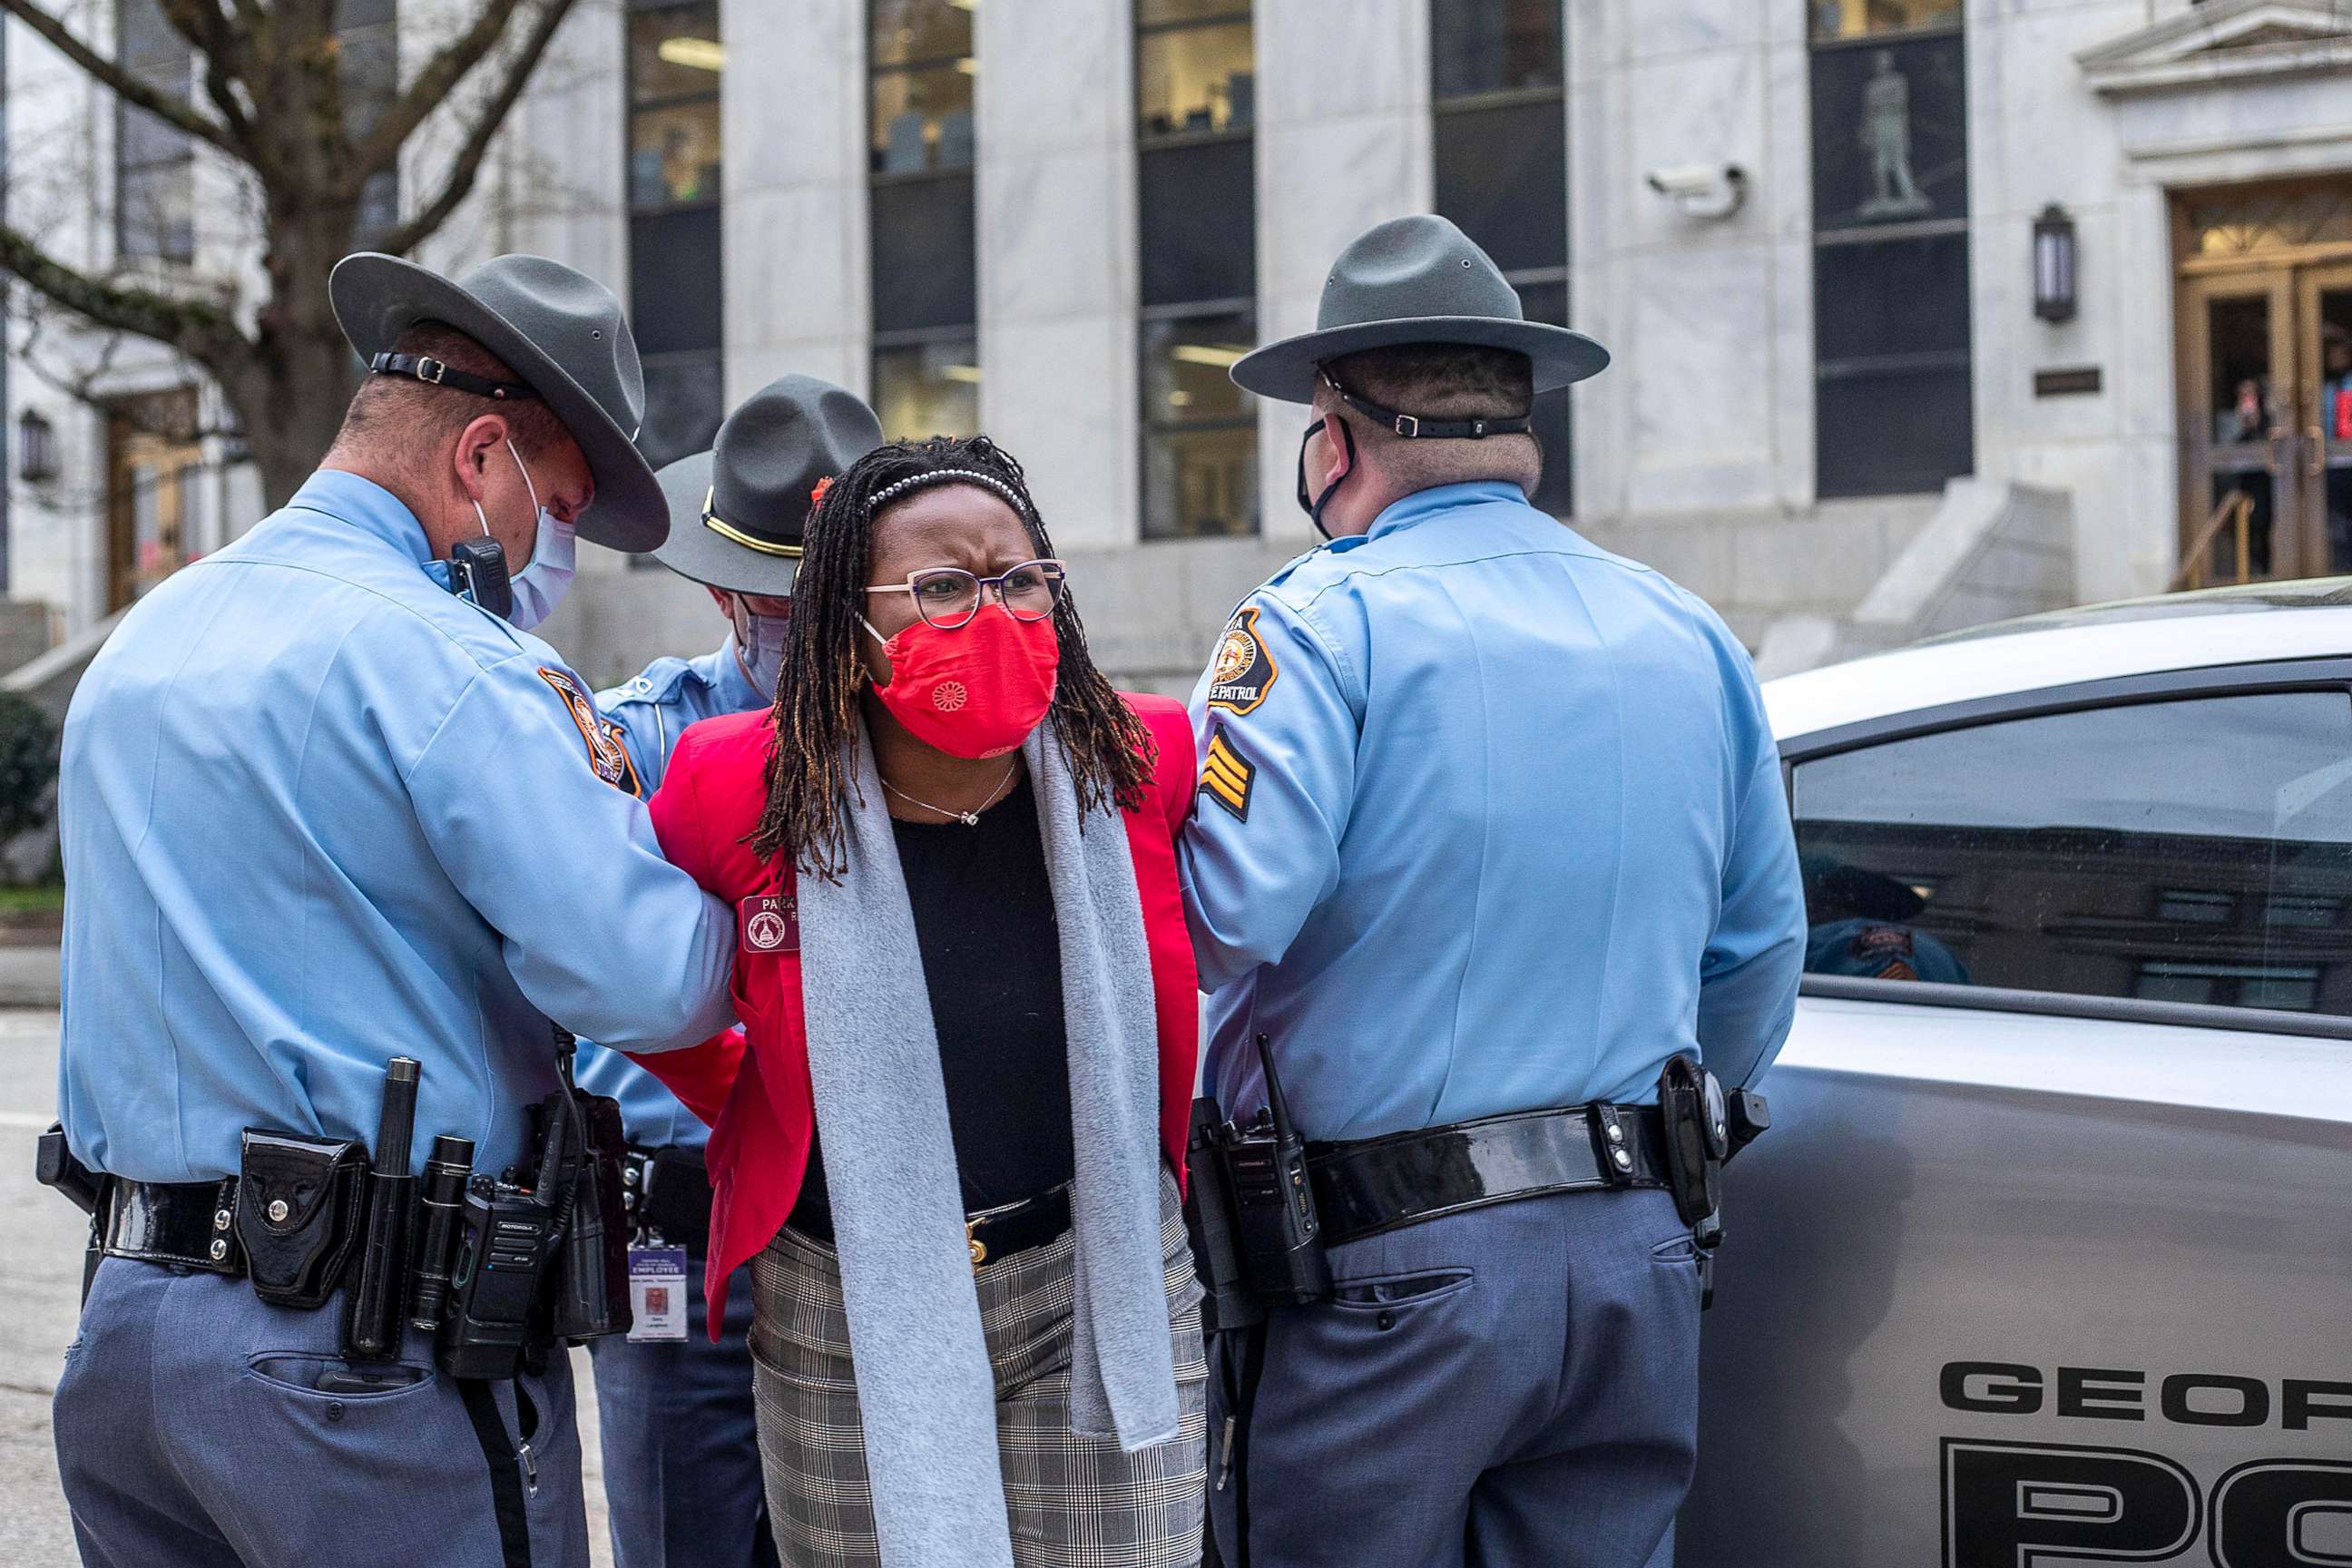 PHOTO: State Rep. Park Cannon is placed into the back of a Georgia State Capitol patrol car after being arrested by Georgia State Troopers at the Georgia State Capitol Building in Atlanta, March 25, 2021.